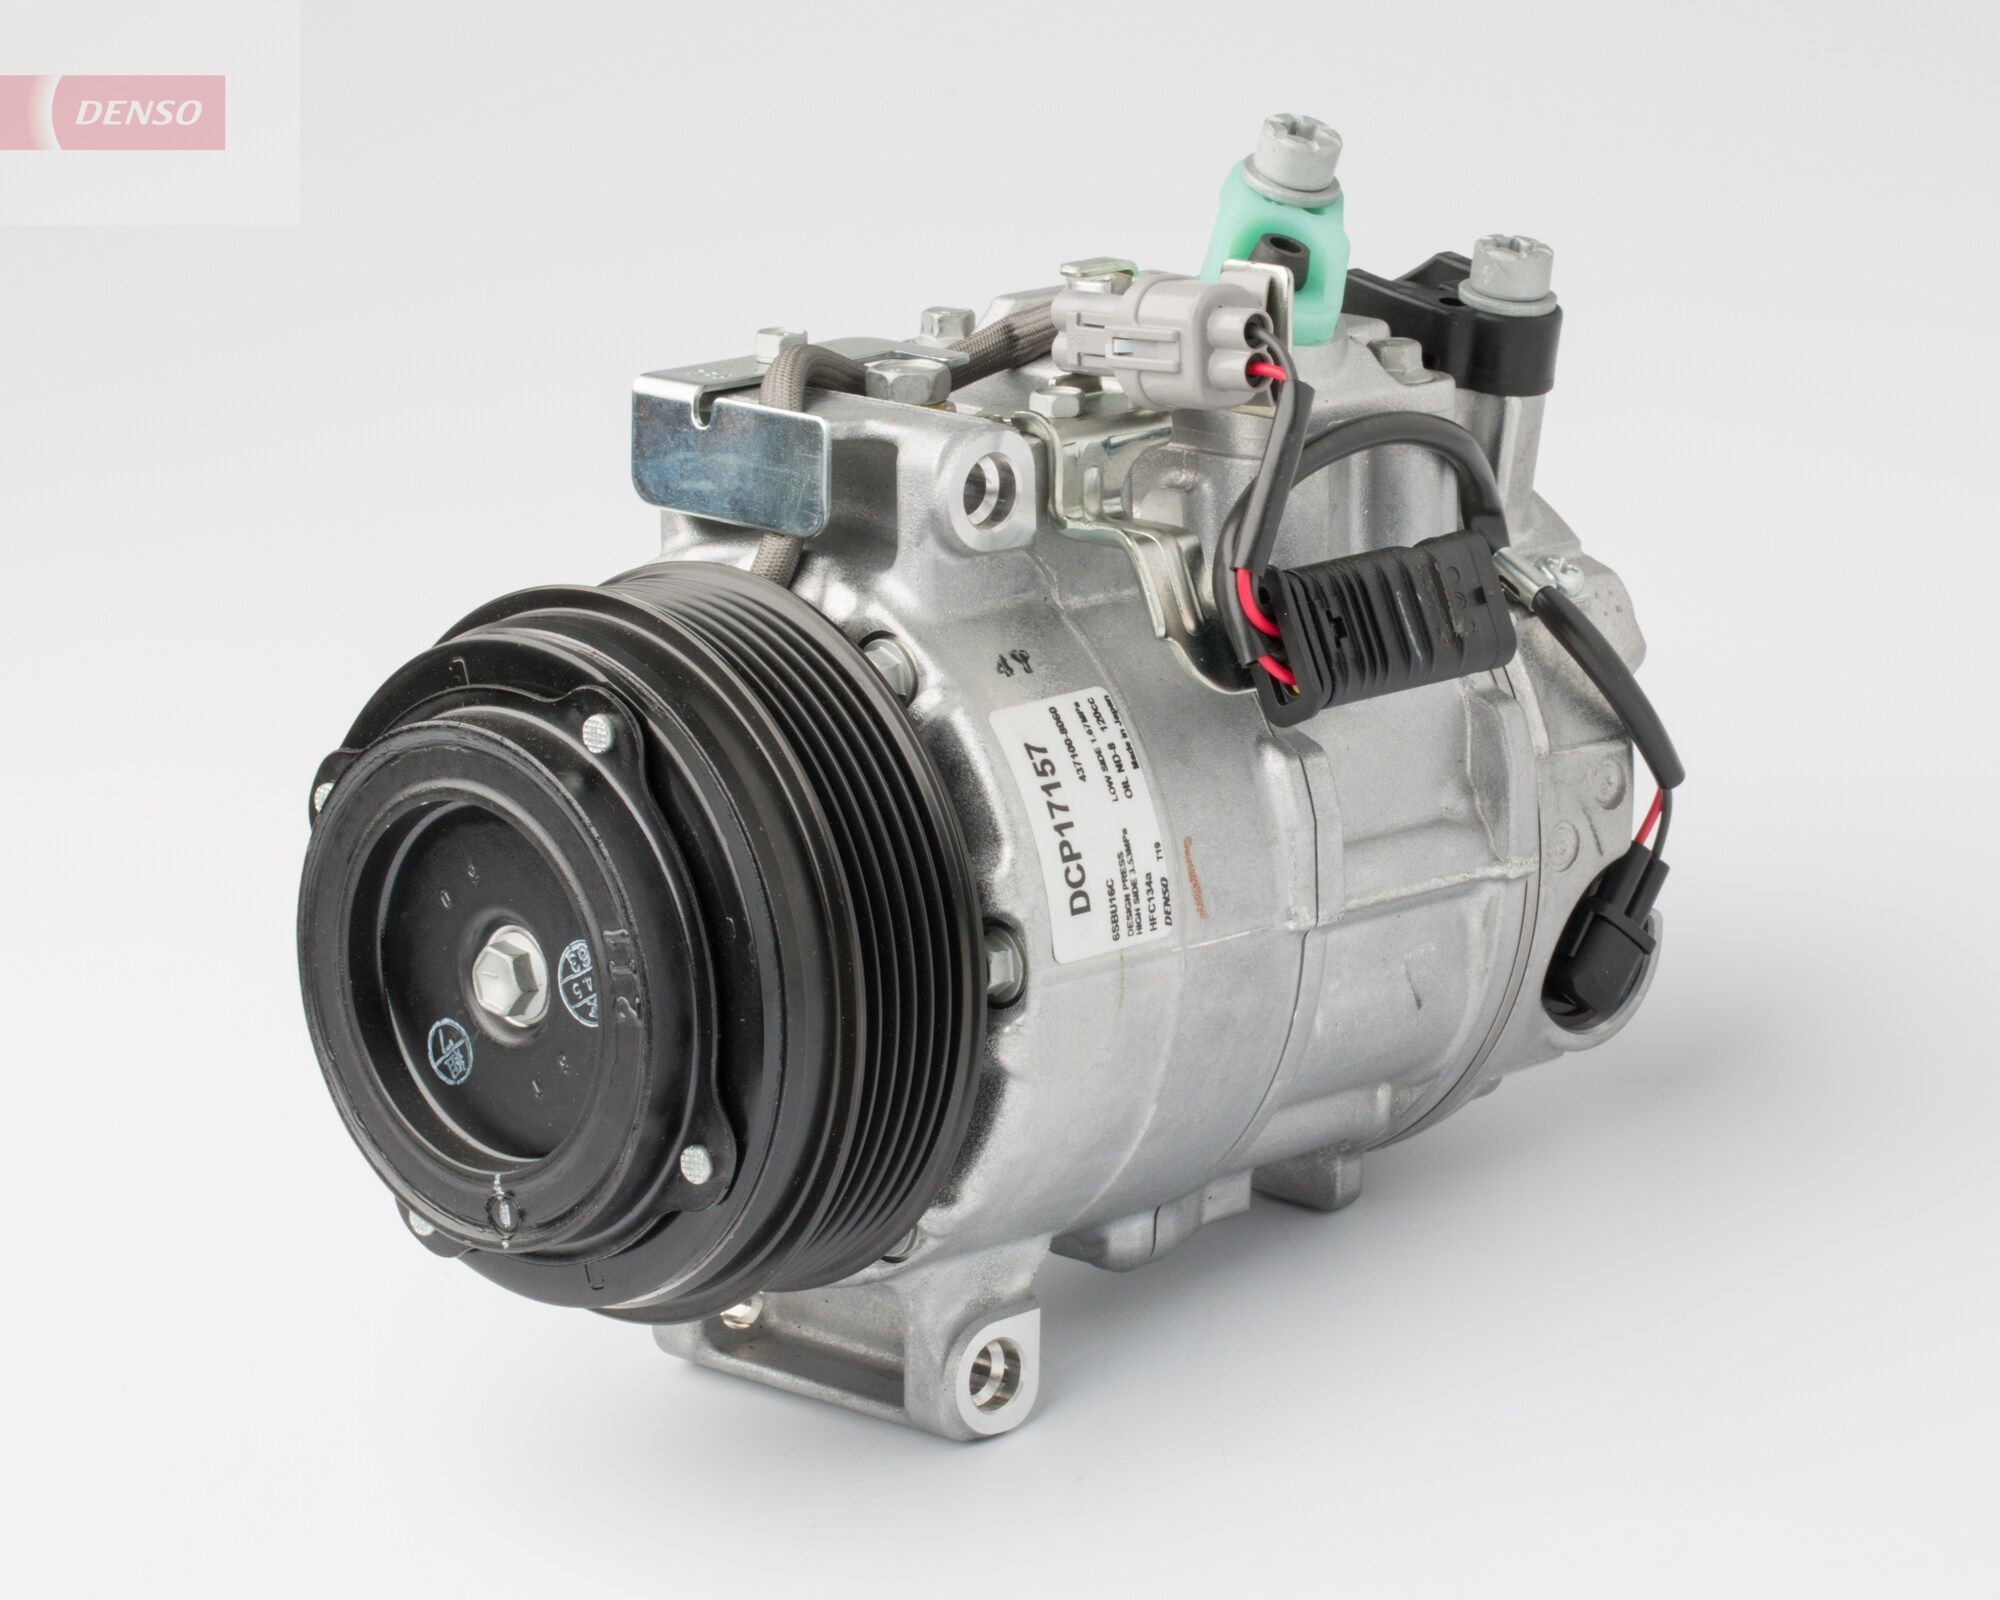 DENSO DCP17157 Air conditioning compressor 6SBU16C, 12V, PAG 46, R 134a, with magnetic clutch